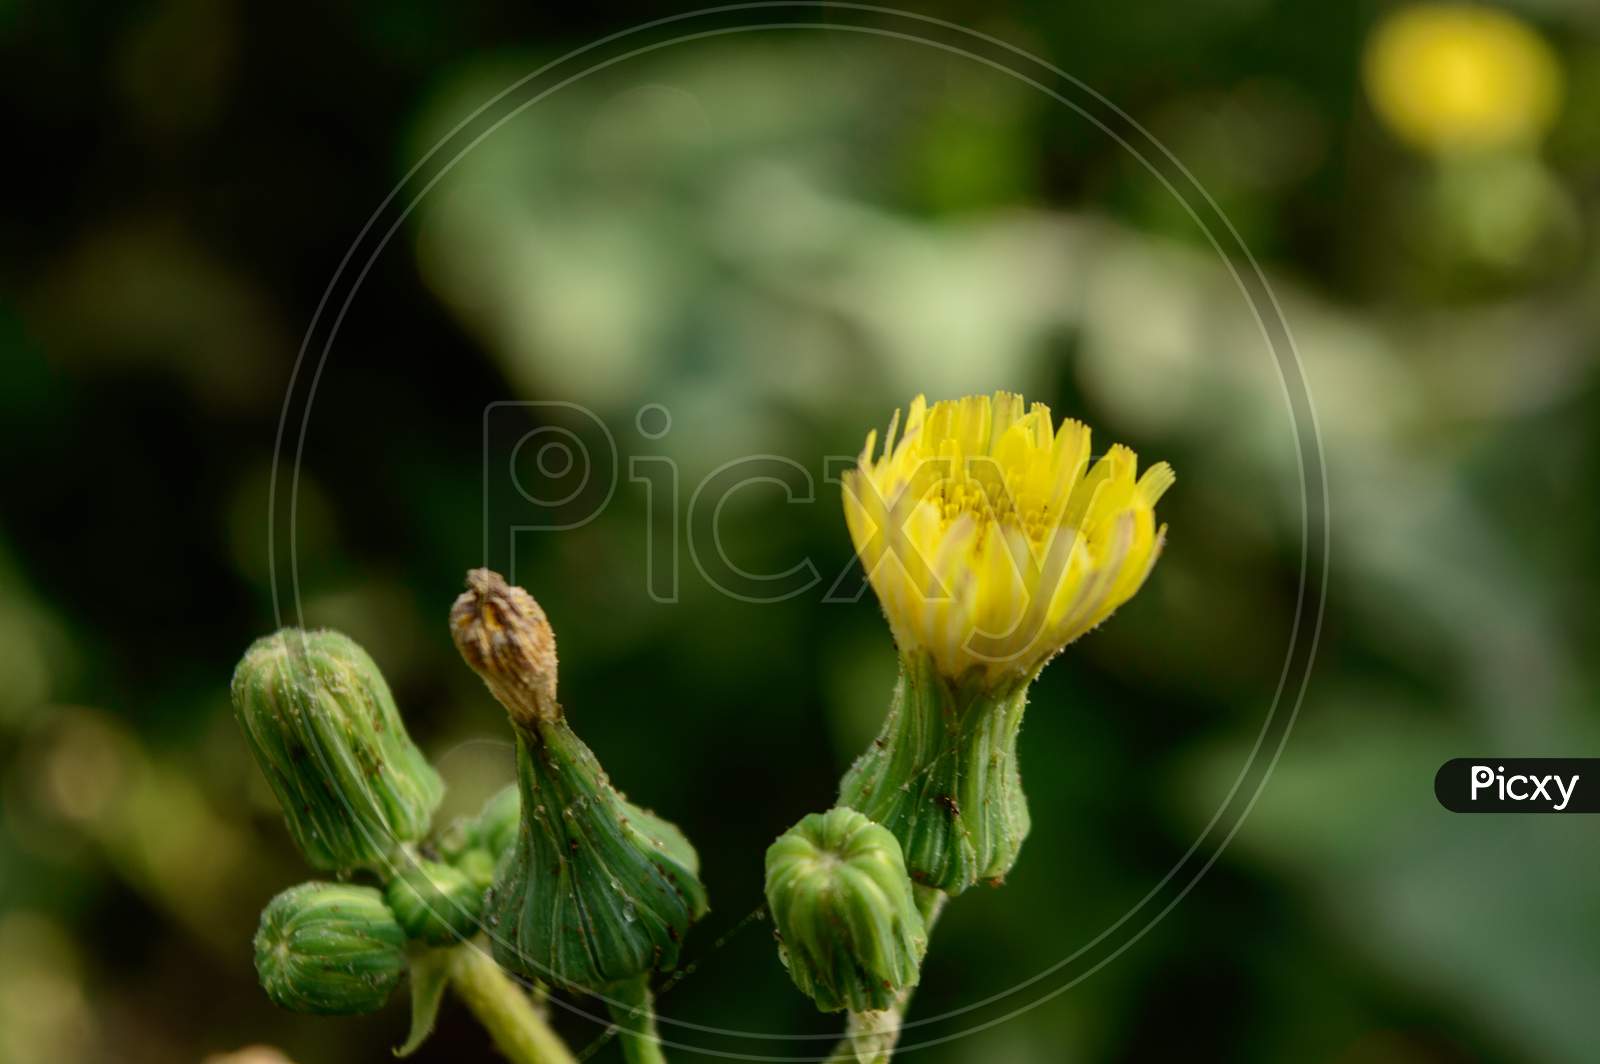 Beautiful Indian Yellow Flower On Field At Evening Cover Up With Spider Web.